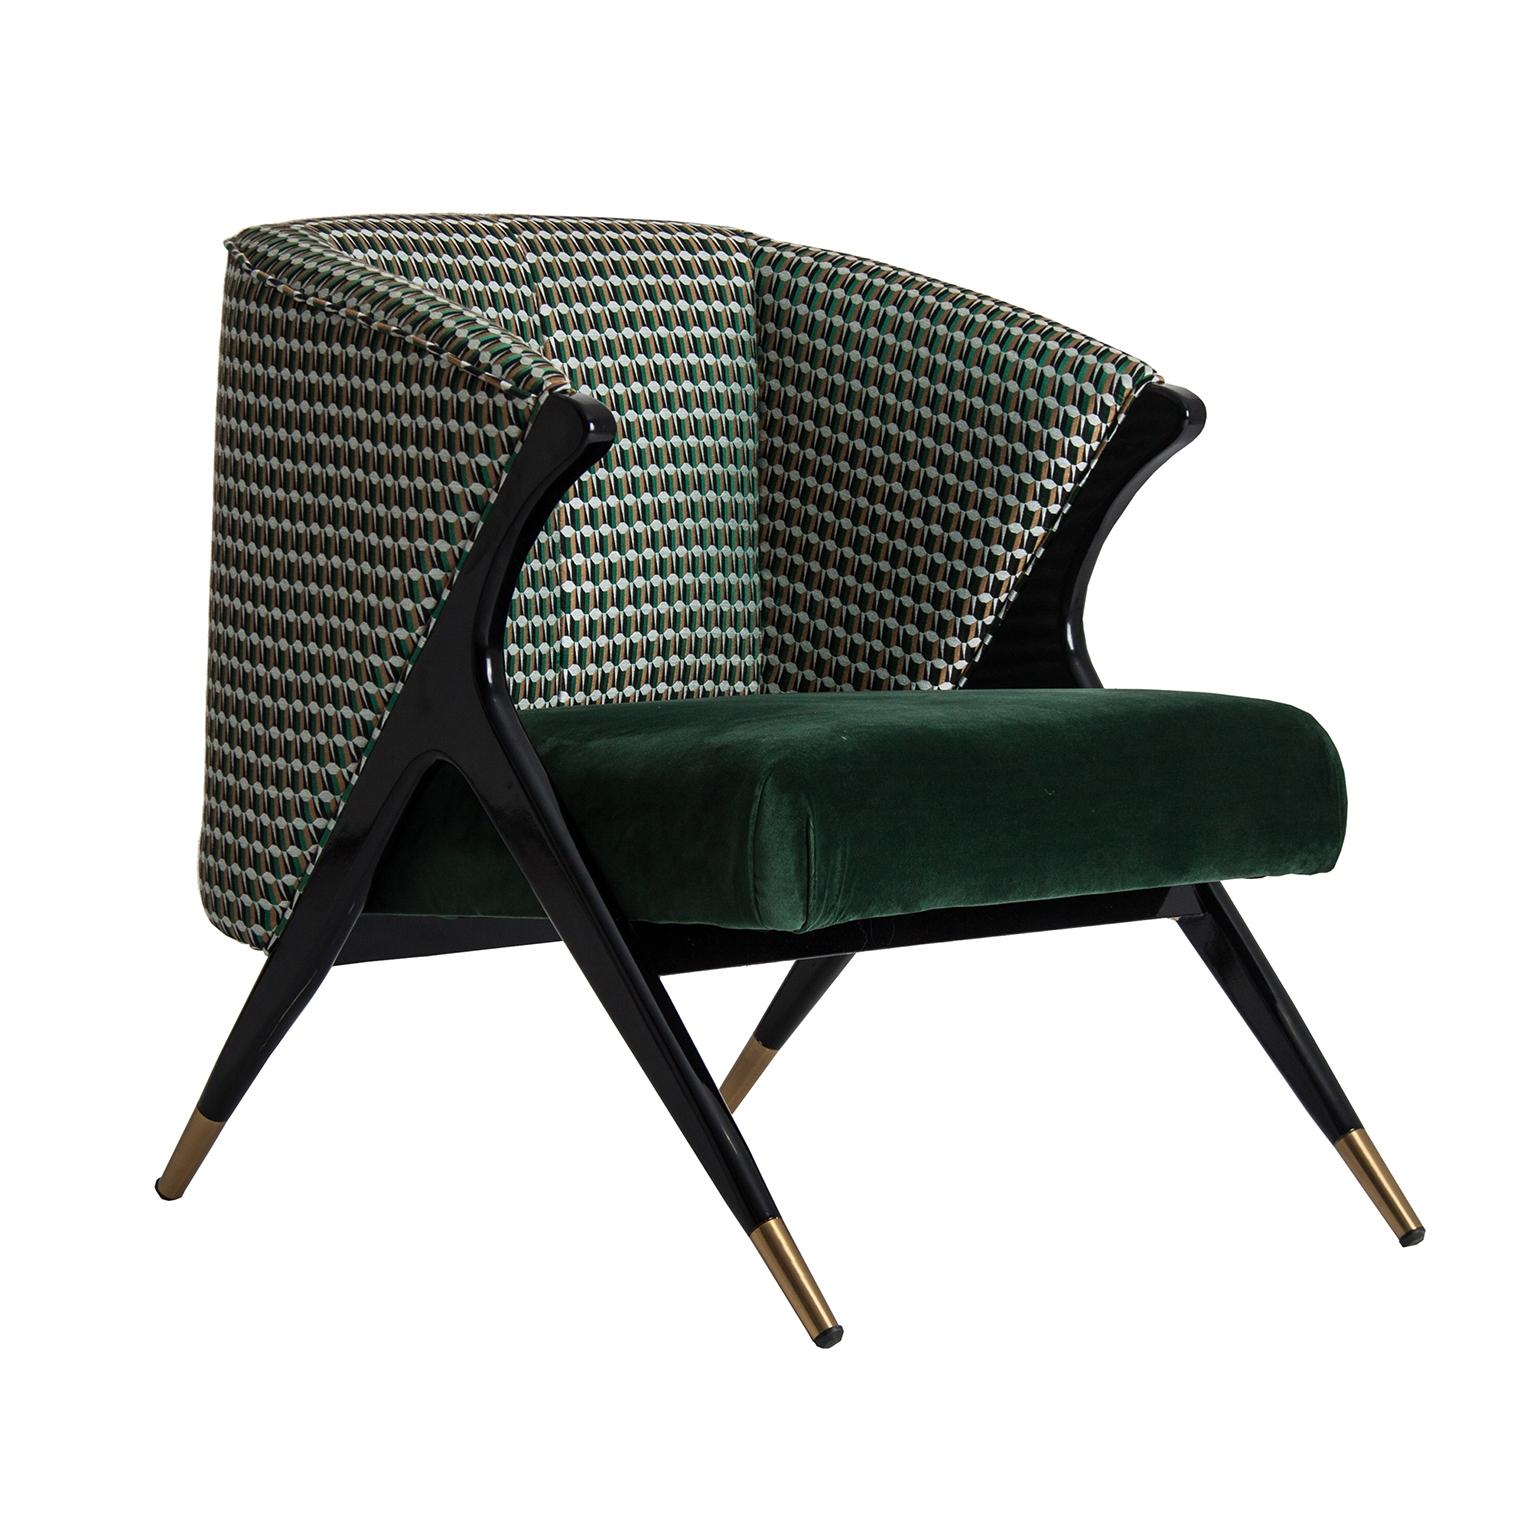 Black lacquer wooden structure with brass finish adorned with deep green forest and graphic velvet lounge armchair Mid-Century Modern style.